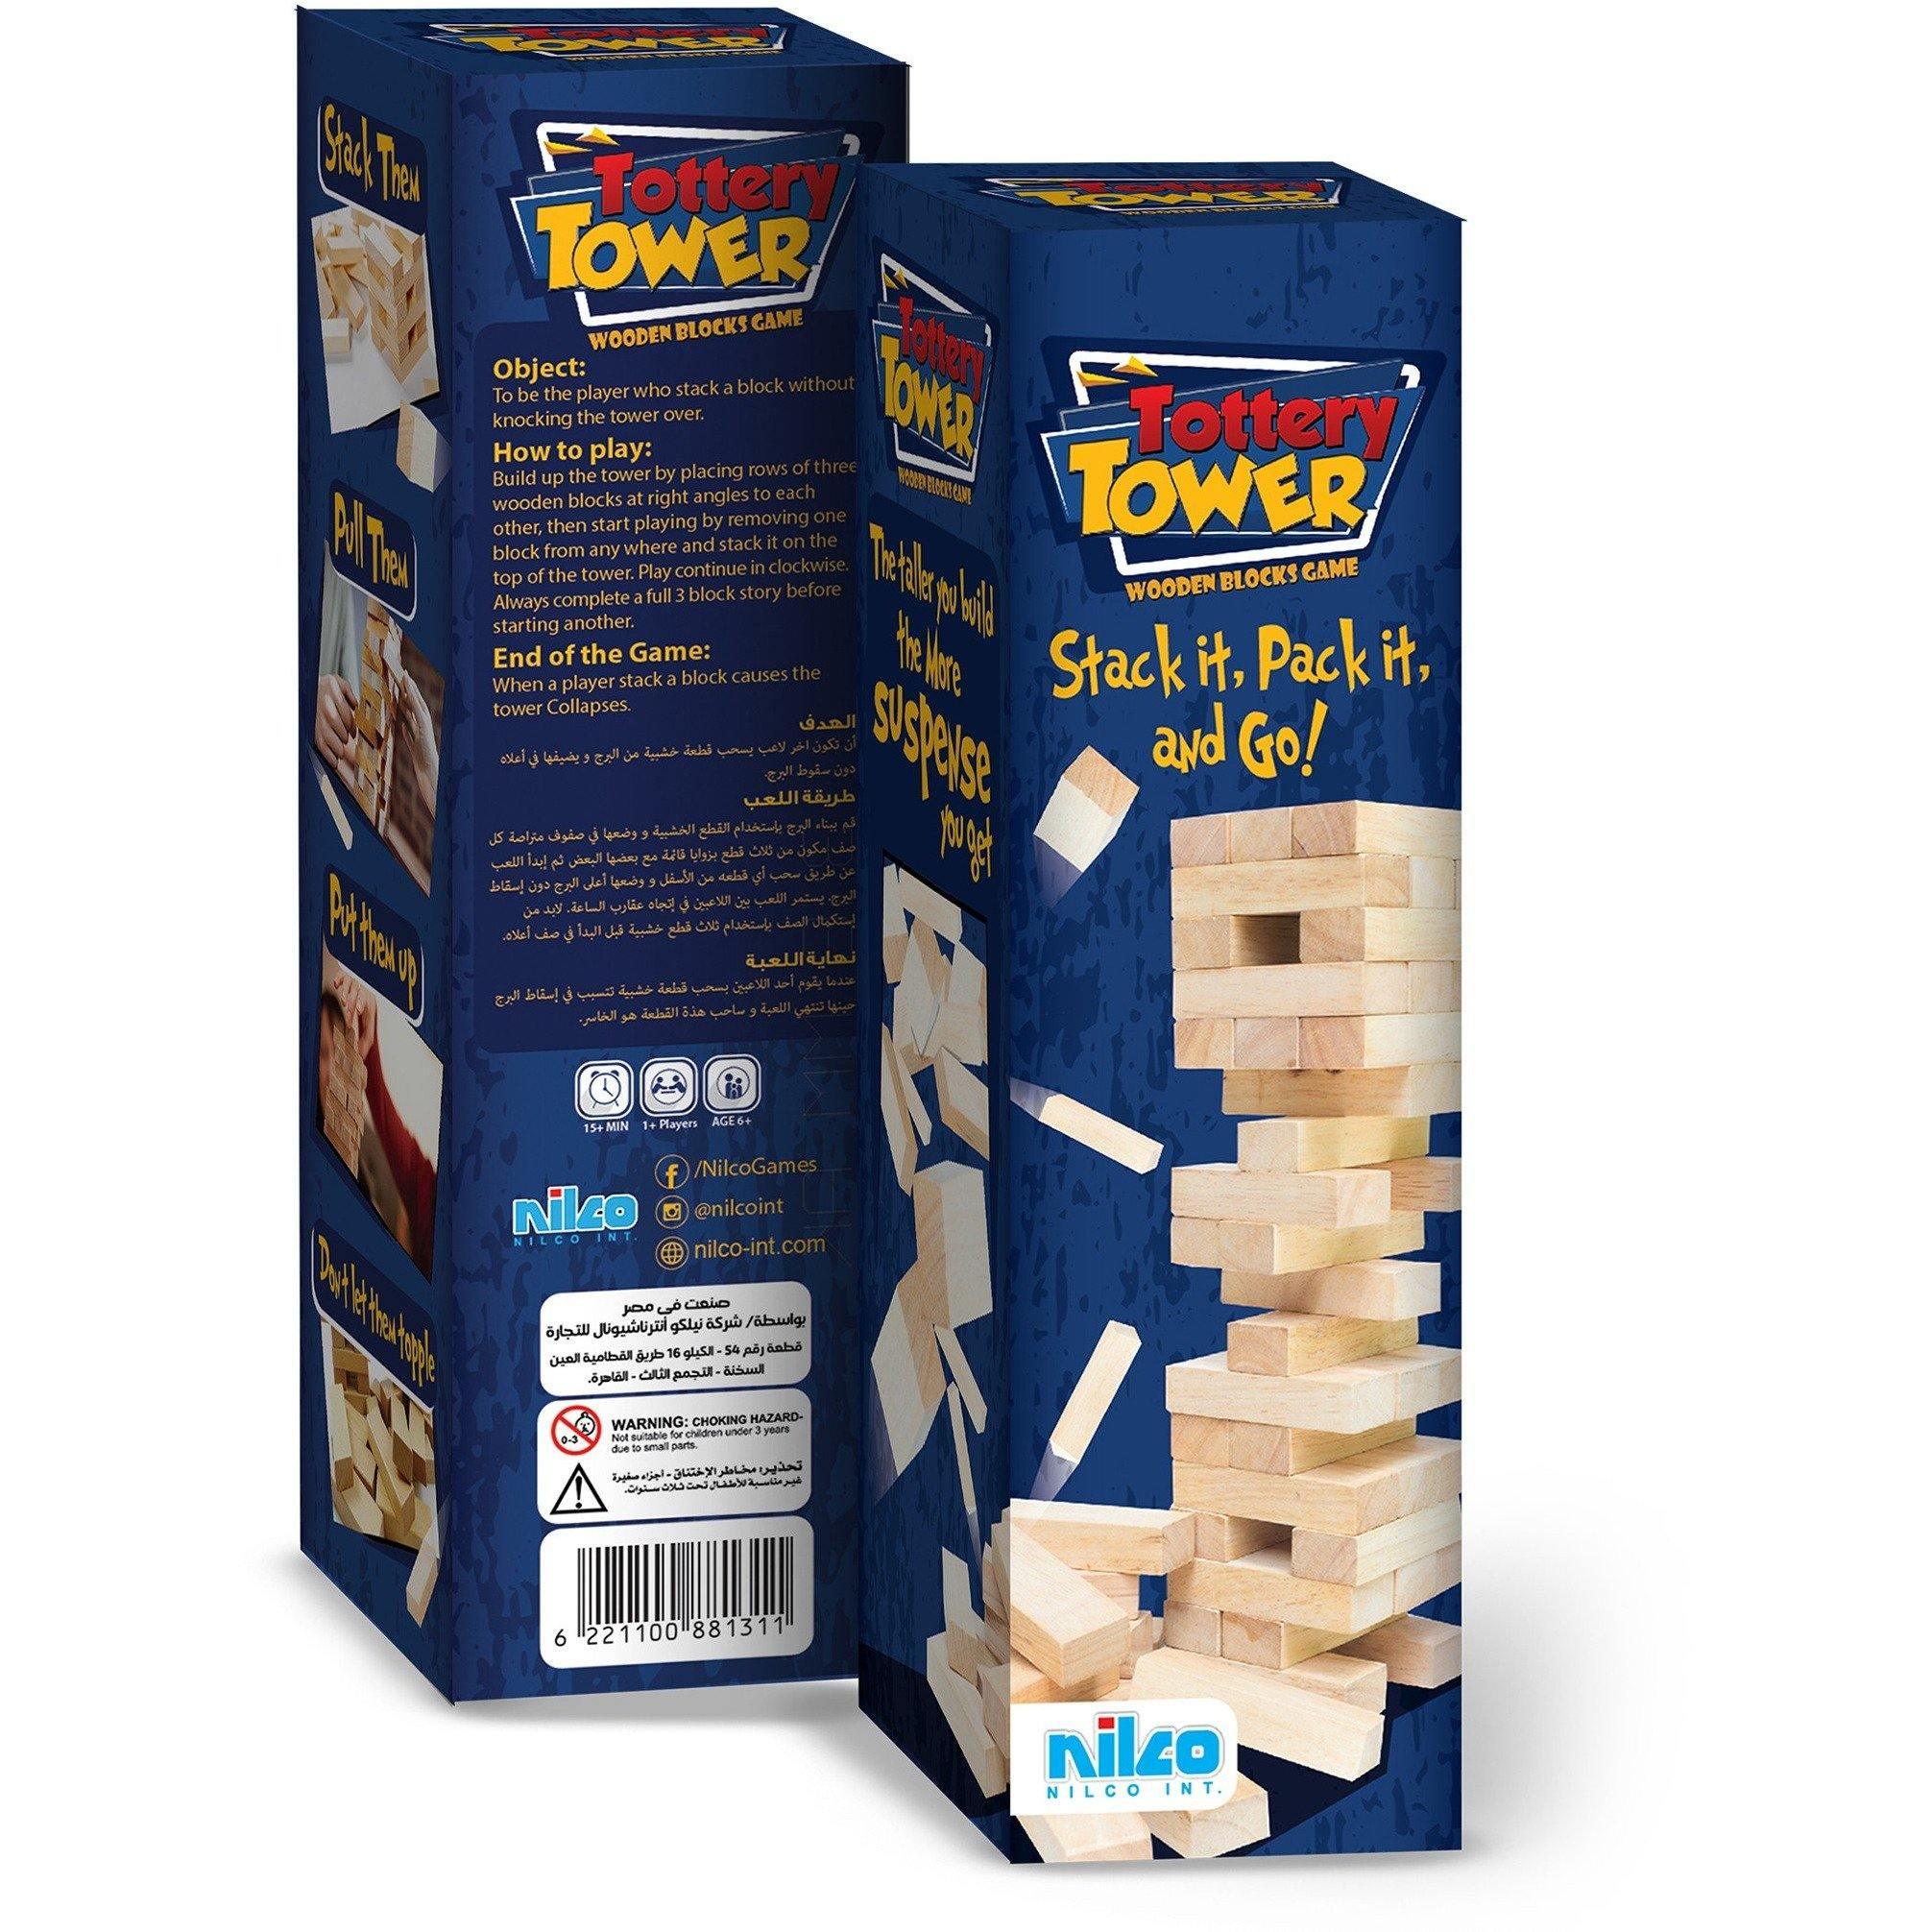 Nilco Tottery Tower Board Game - BumbleToys - 5-7 Years, Card & Board Games, Nilco, Puzzle & Board & Card Games, Unisex